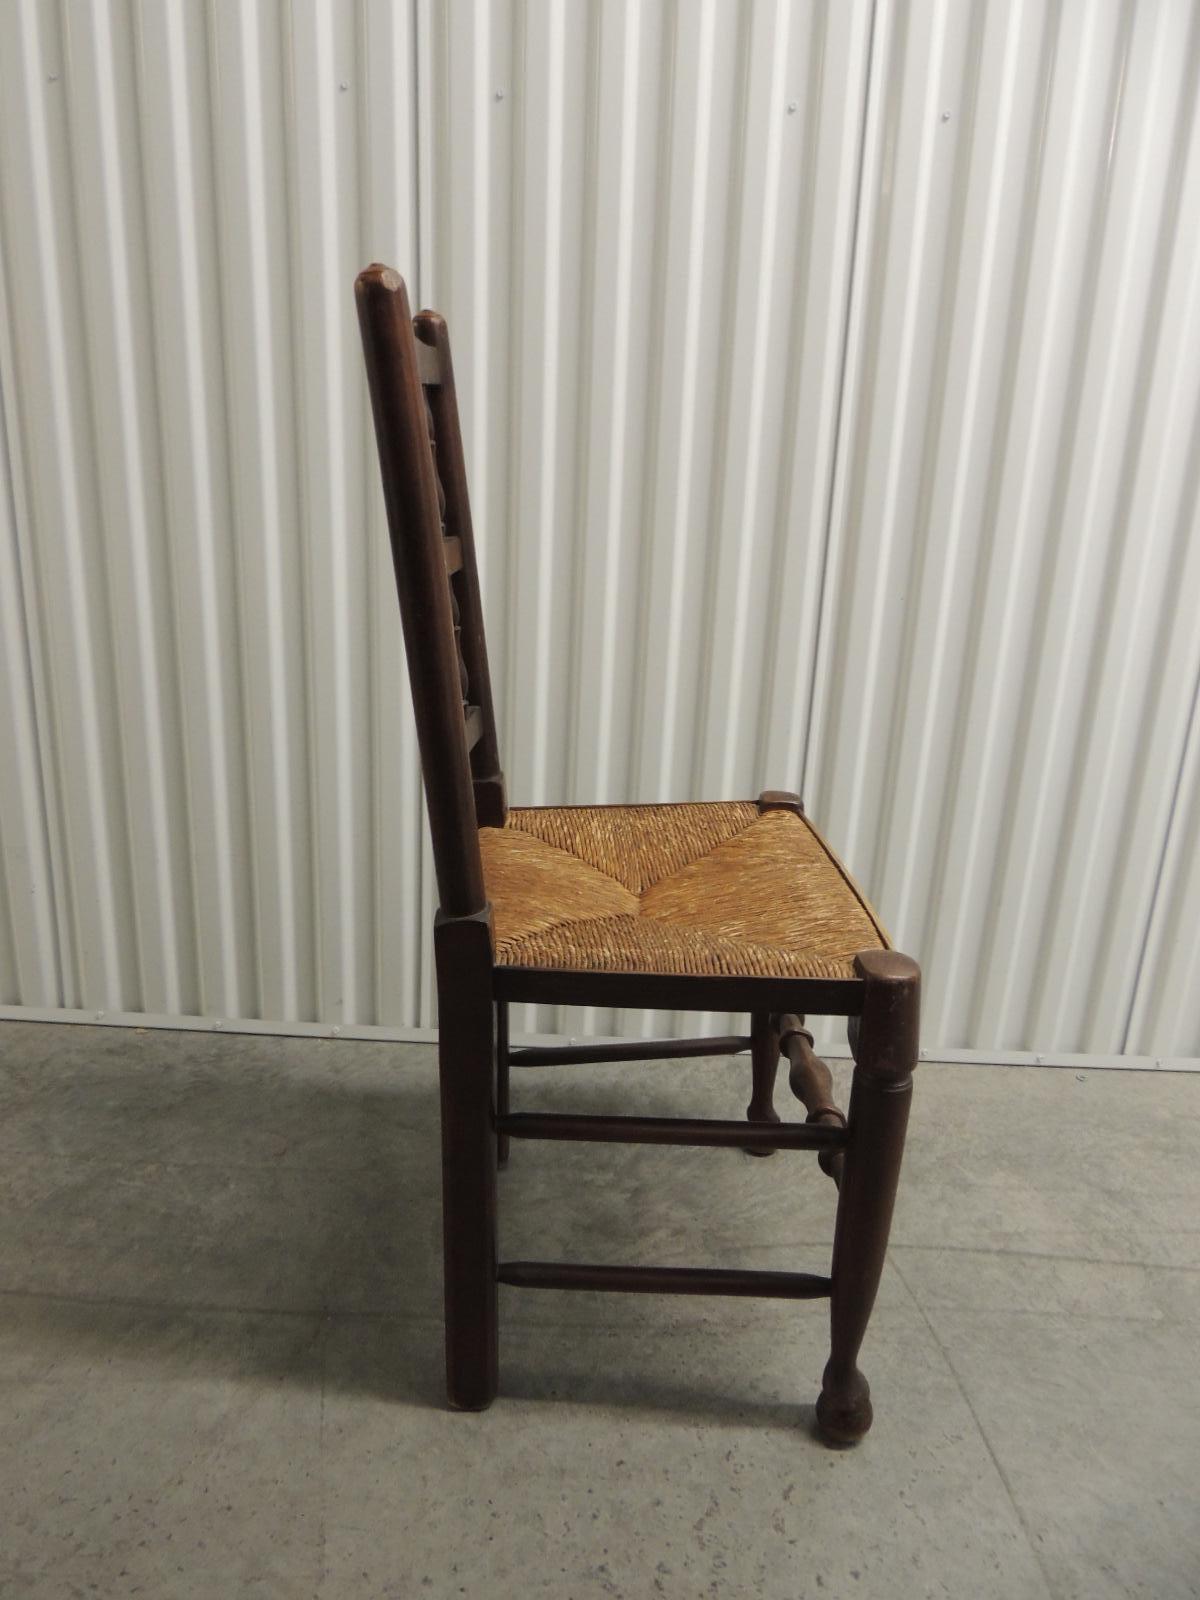 Rustic English Country Antique Wood Dining Chair with Rush Seat